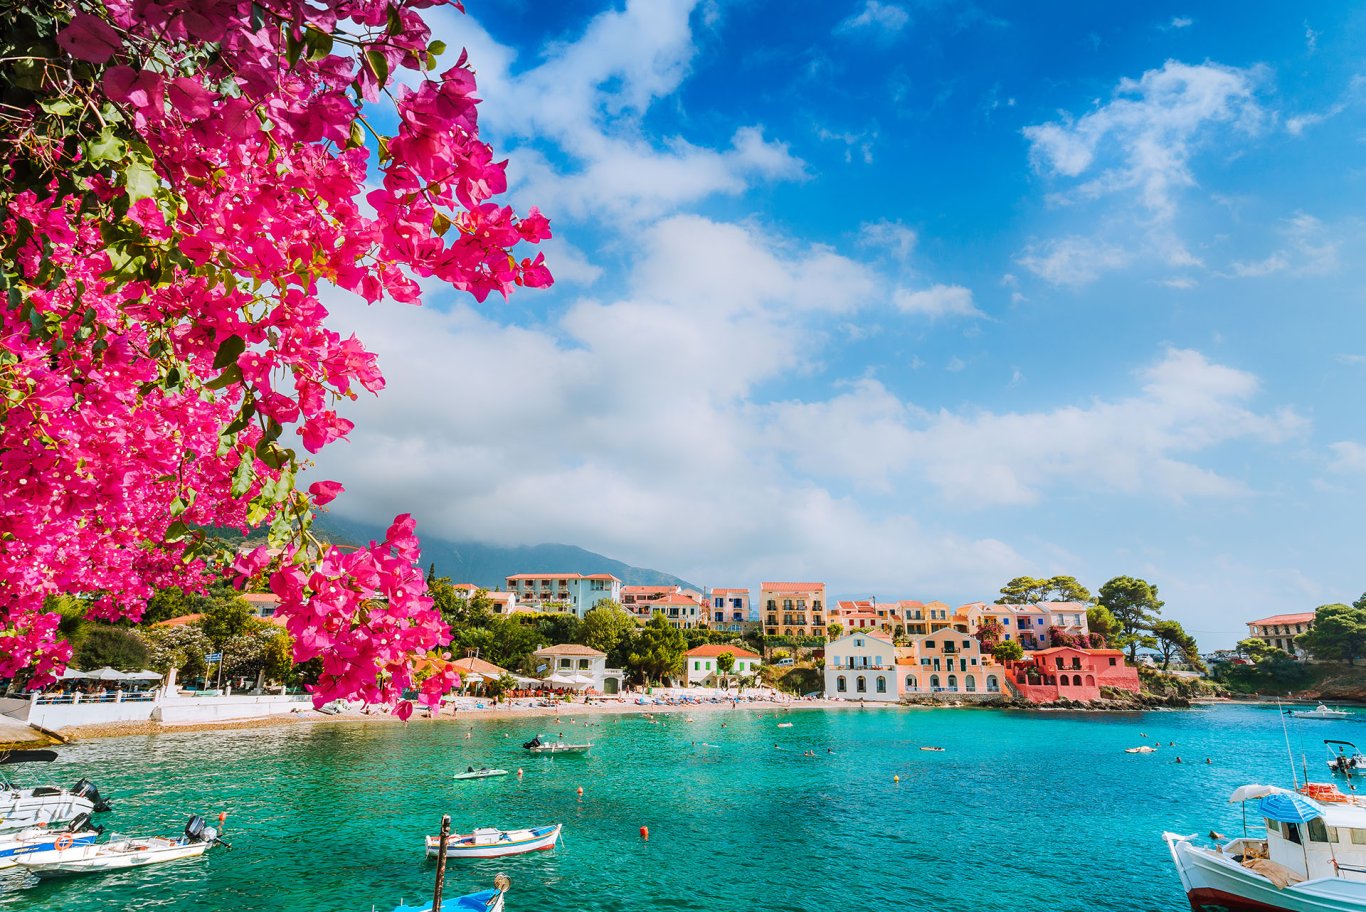 A photo of the coast in Greece with boats on the turquoise water and a tree with bright pink flowers in the view